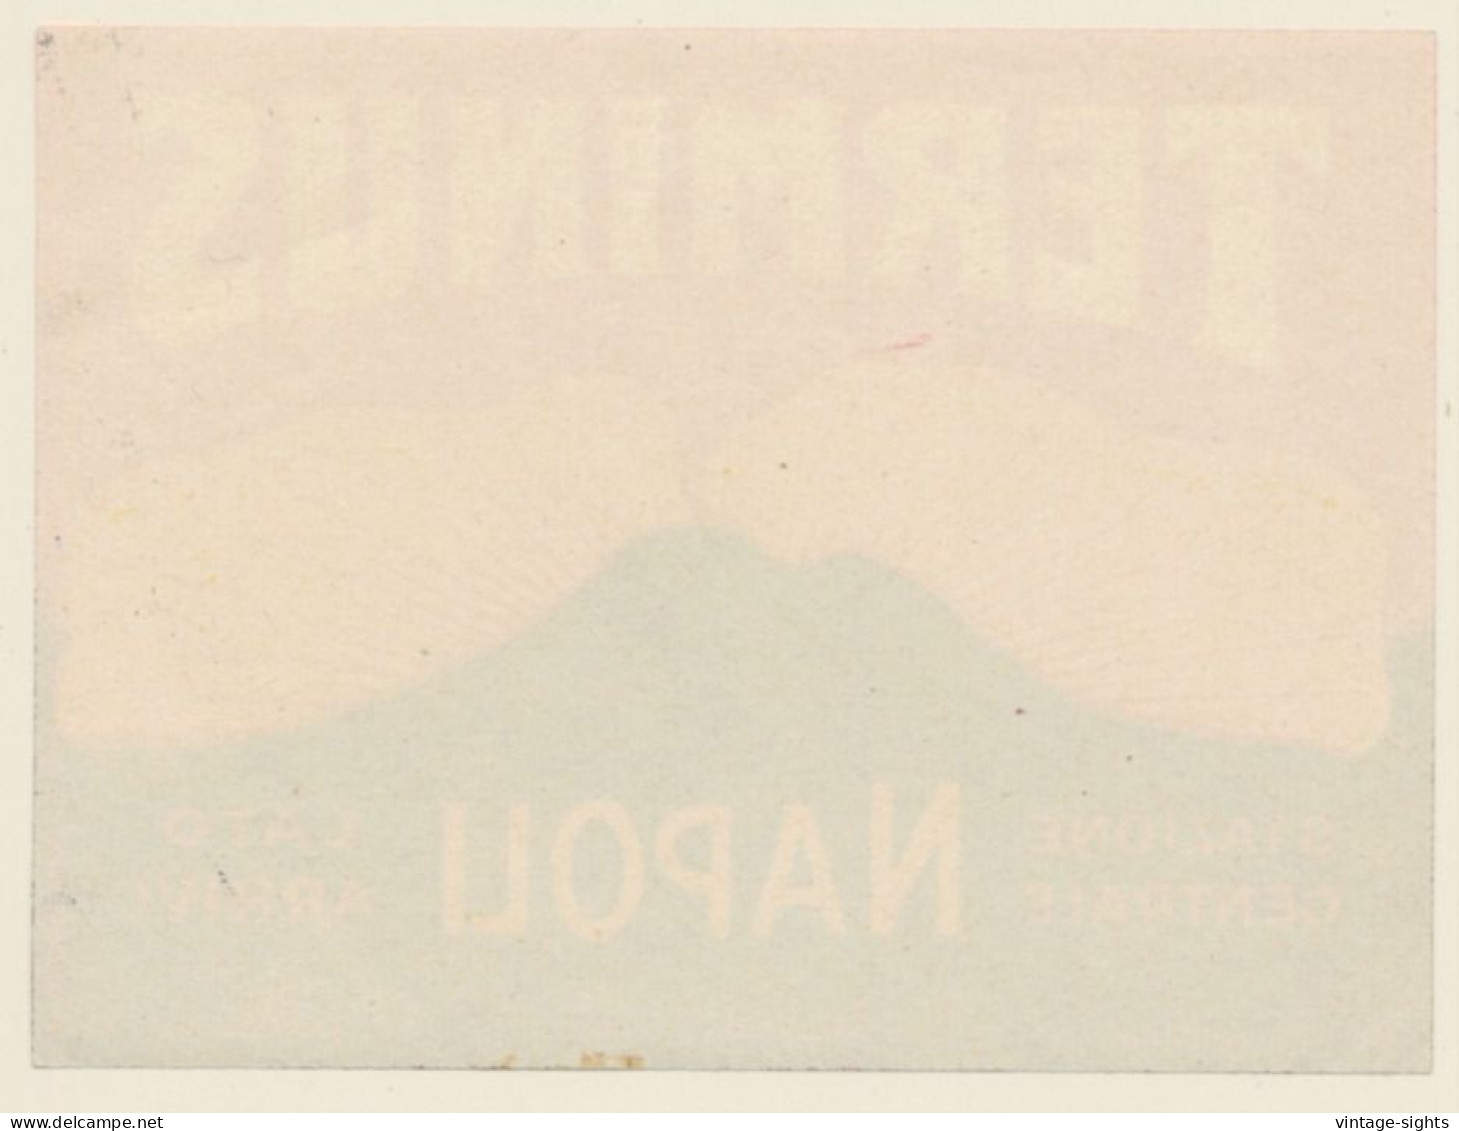 Naples / Italy: Terminus Hotel Napoli (Vintage Luggage Label RICHTER 1930s) - Hotel Labels